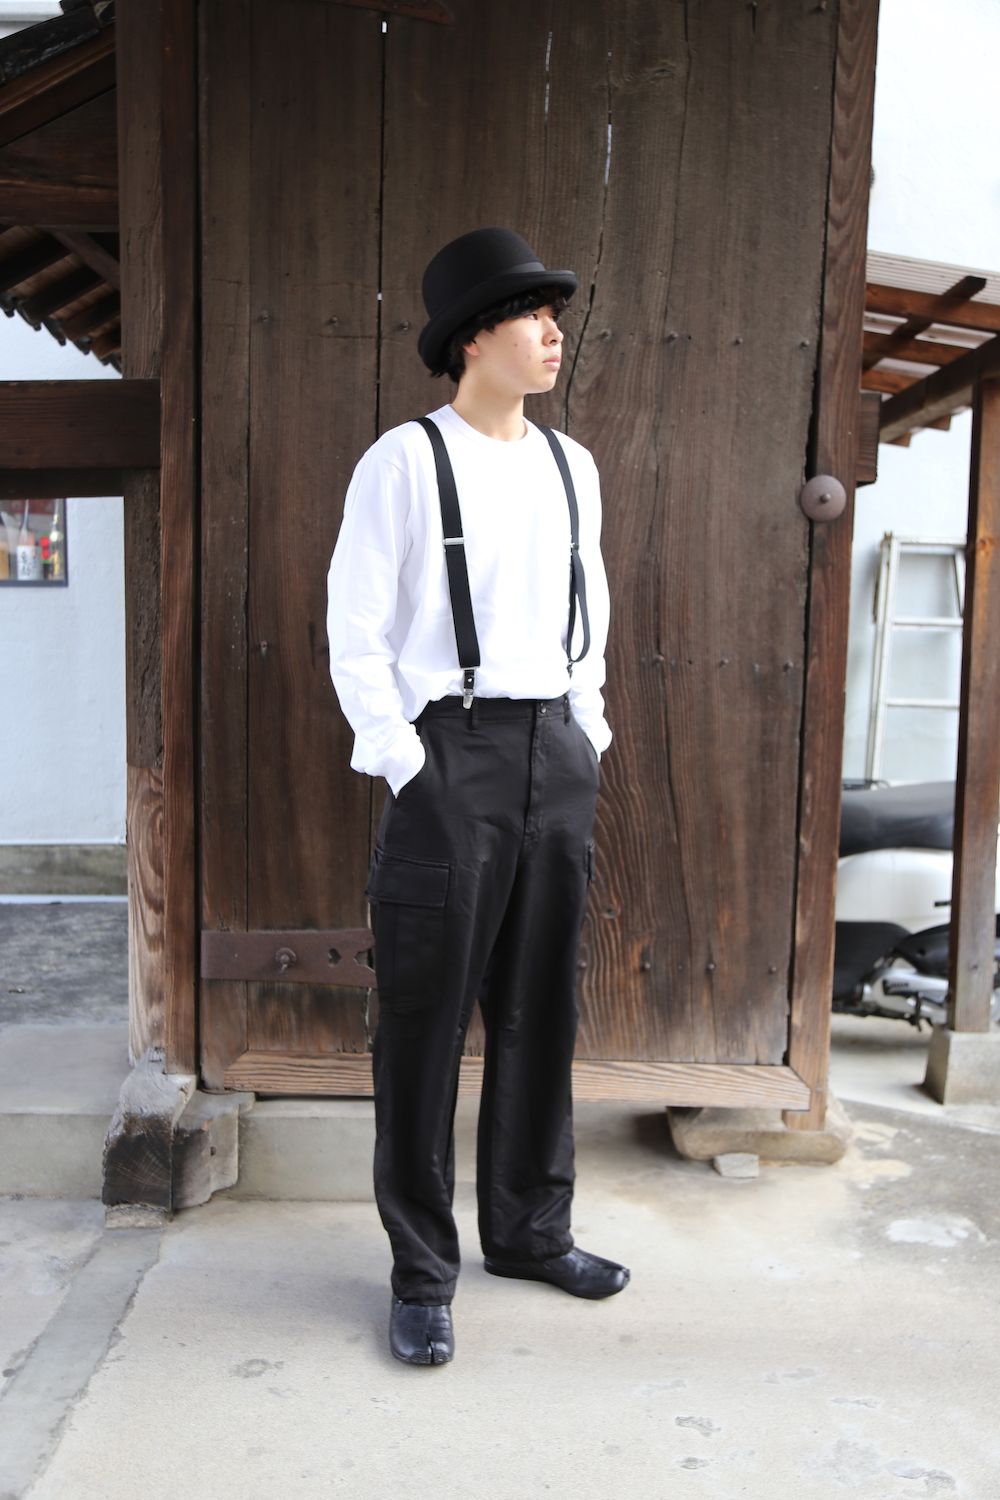 COMME des GARCONS HOMME エステルツイルカーゴパンツ製品染(HG-P004-051) style 2021.02.07. |  1545 | mark